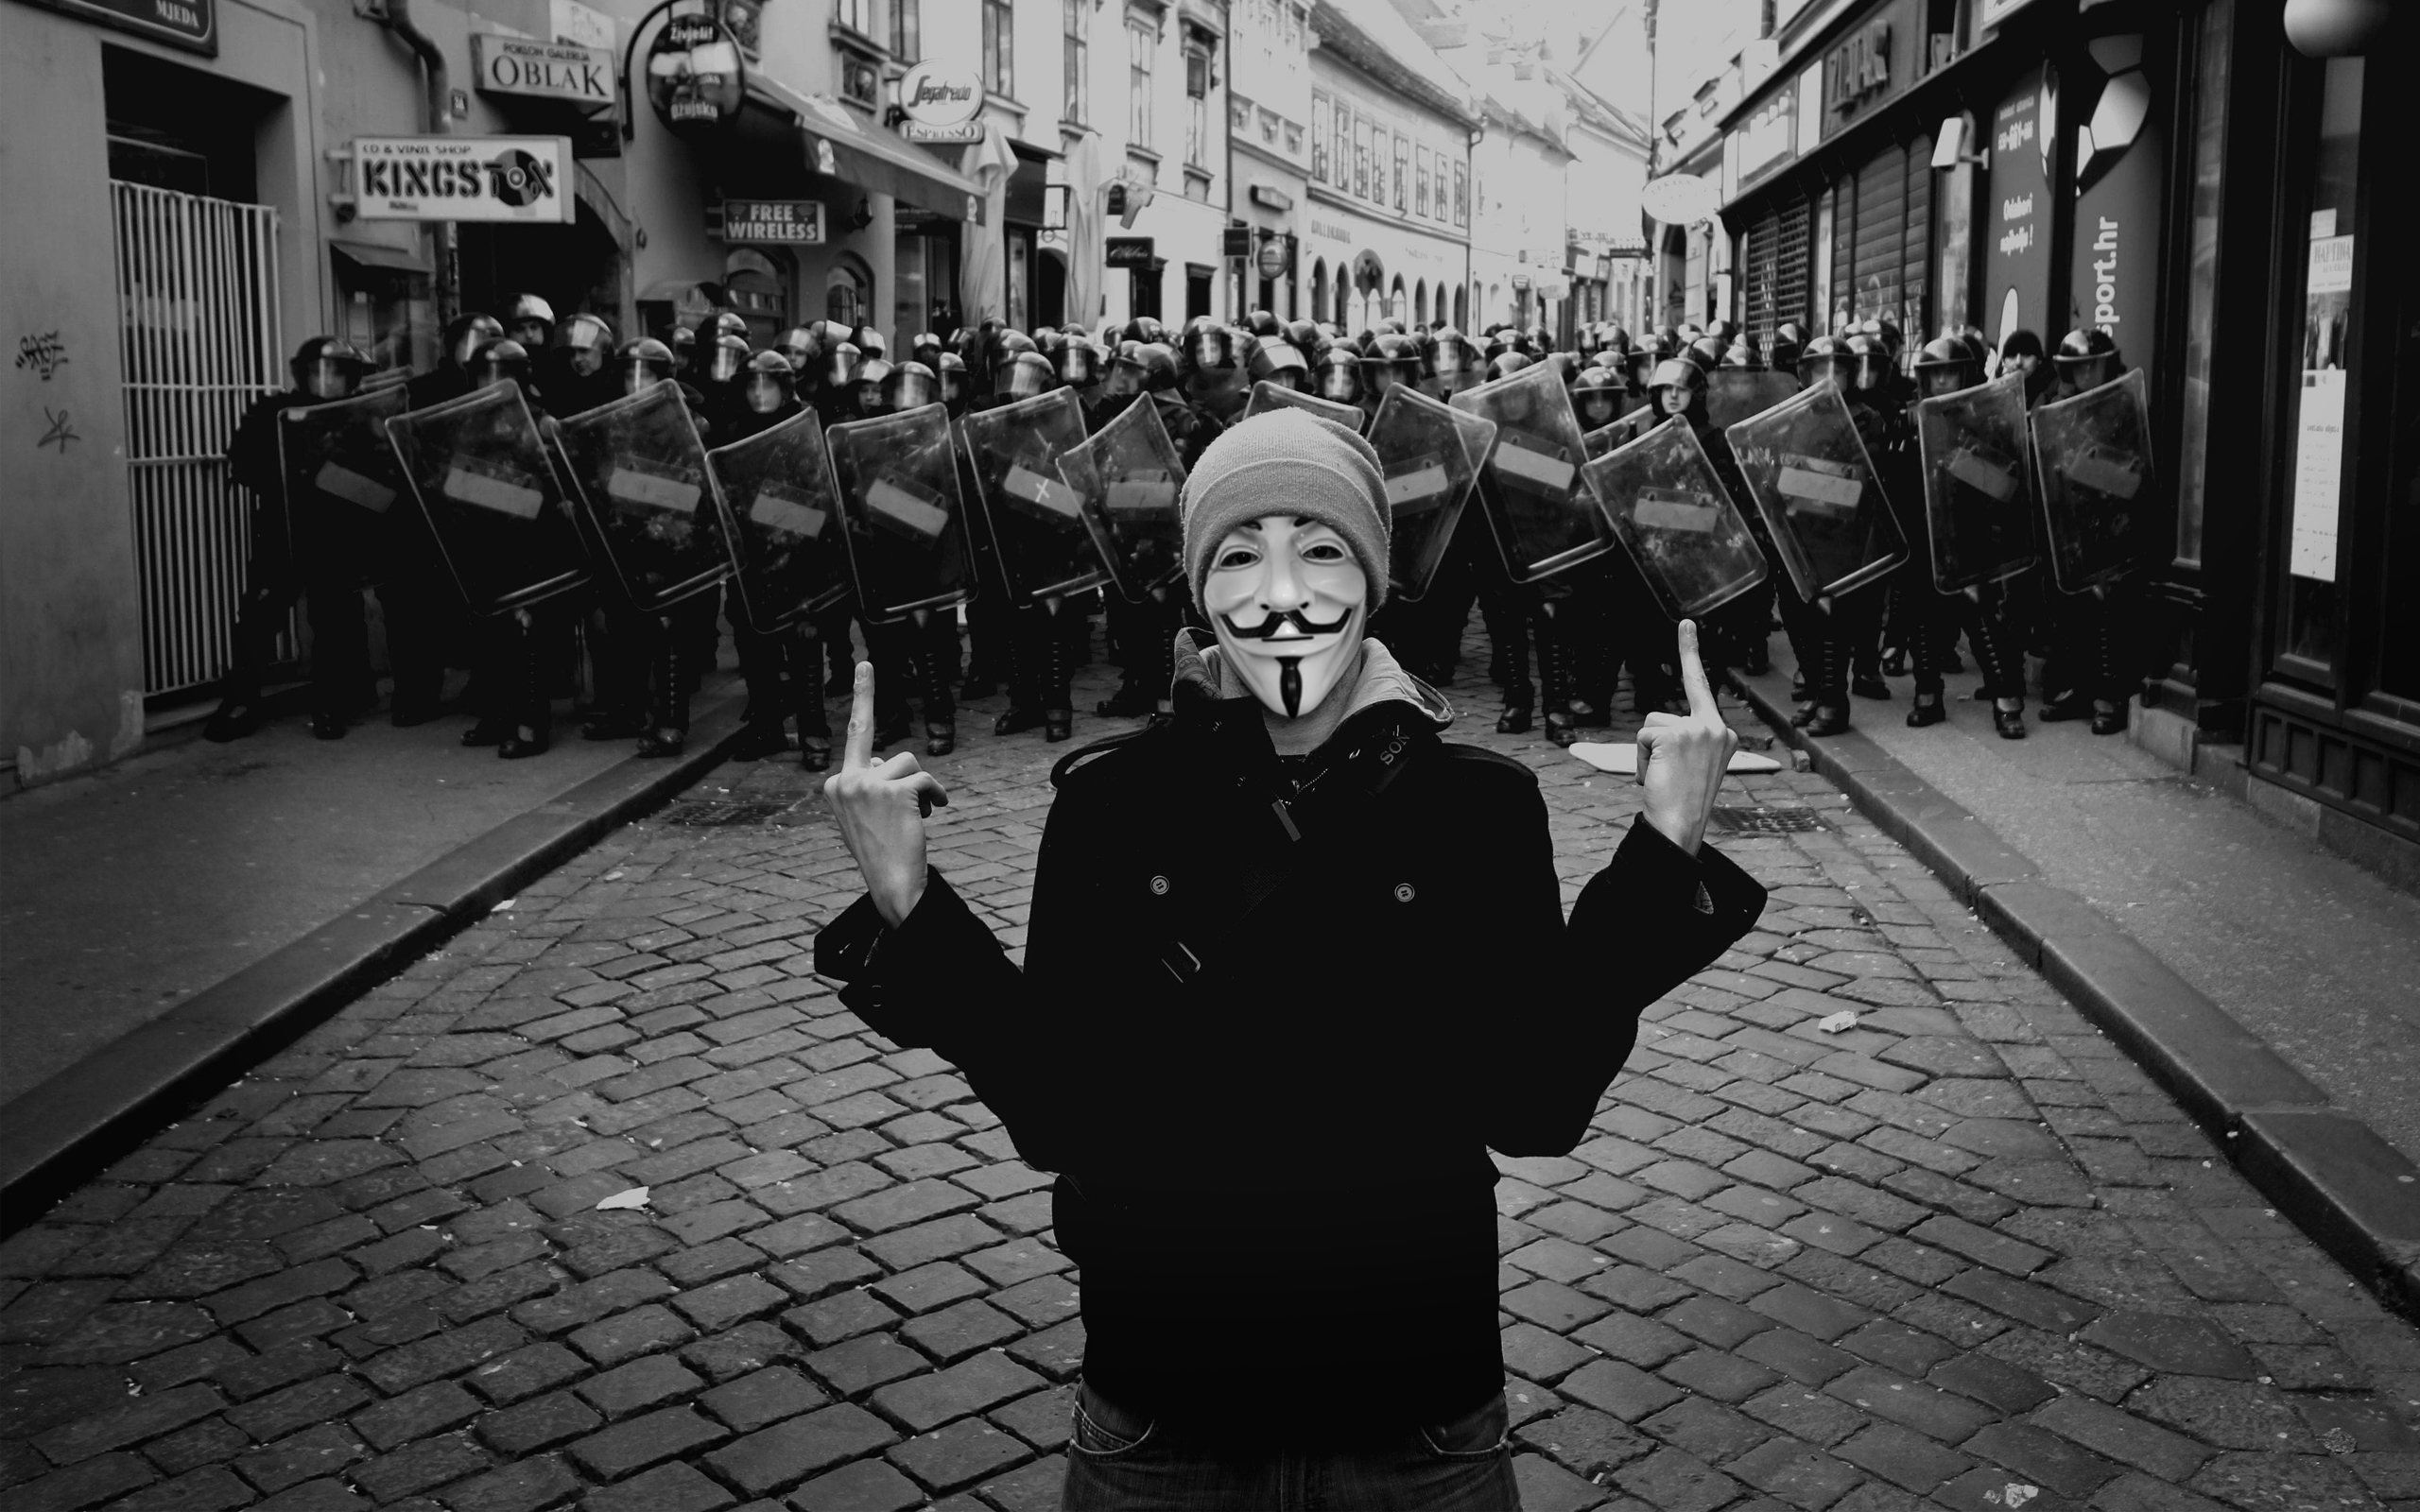 anarchy, technology, anonymous High Definition image